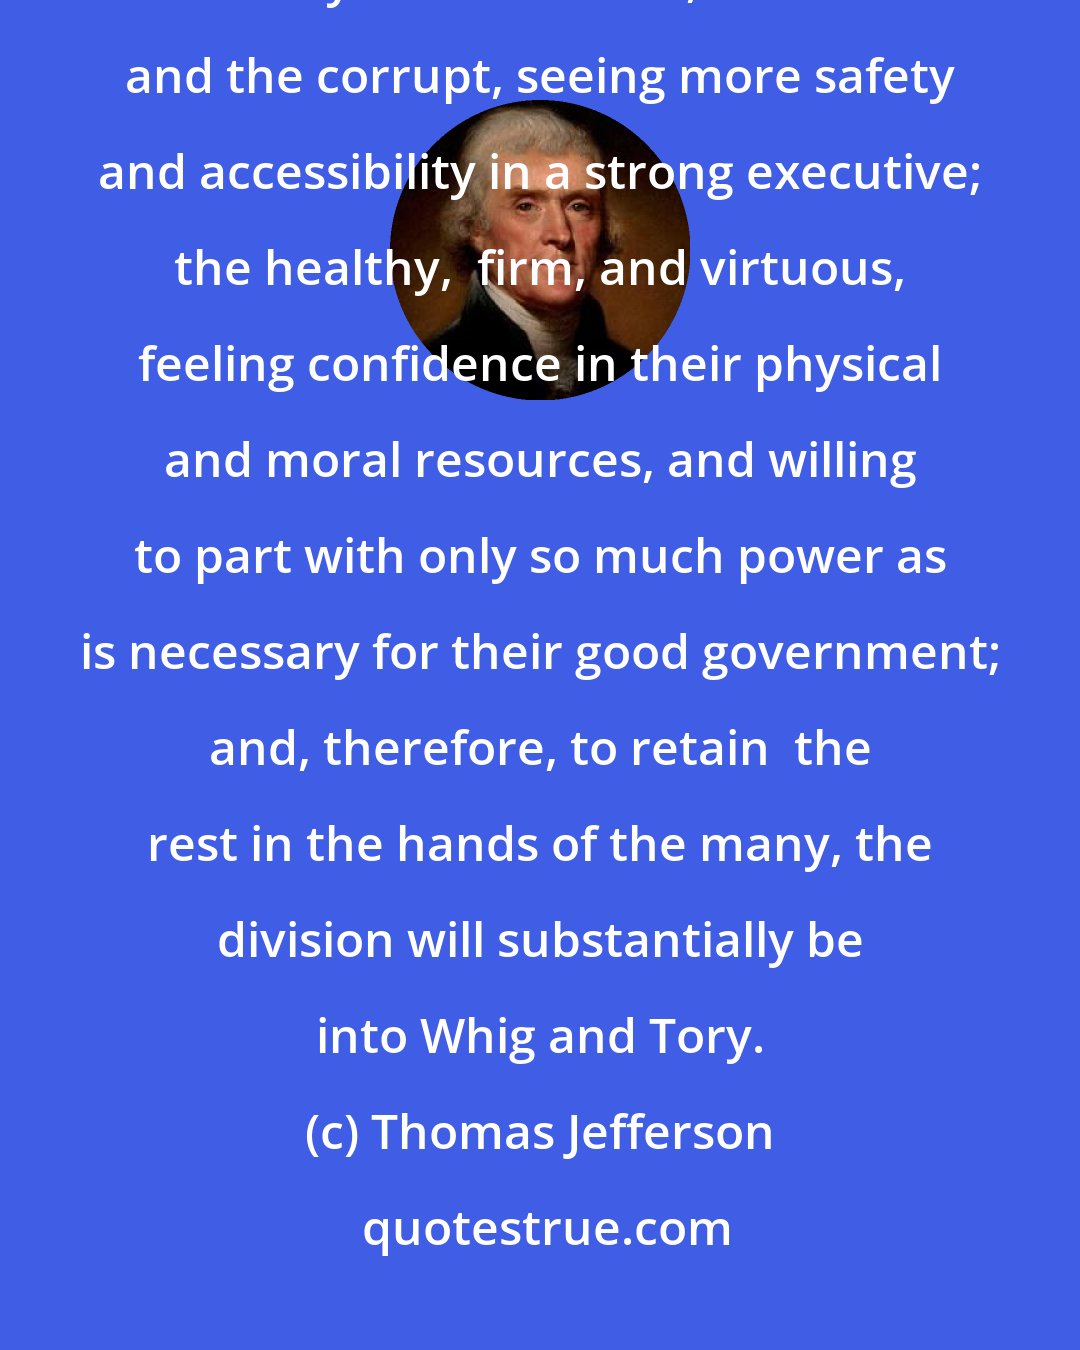 Thomas Jefferson: The division into whig and tory is founded in the nature of men; the weakly and nerveless, the rich and the corrupt, seeing more safety and accessibility in a strong executive; the healthy,  firm, and virtuous, feeling confidence in their physical and moral resources, and willing to part with only so much power as is necessary for their good government; and, therefore, to retain  the rest in the hands of the many, the division will substantially be into Whig and Tory.